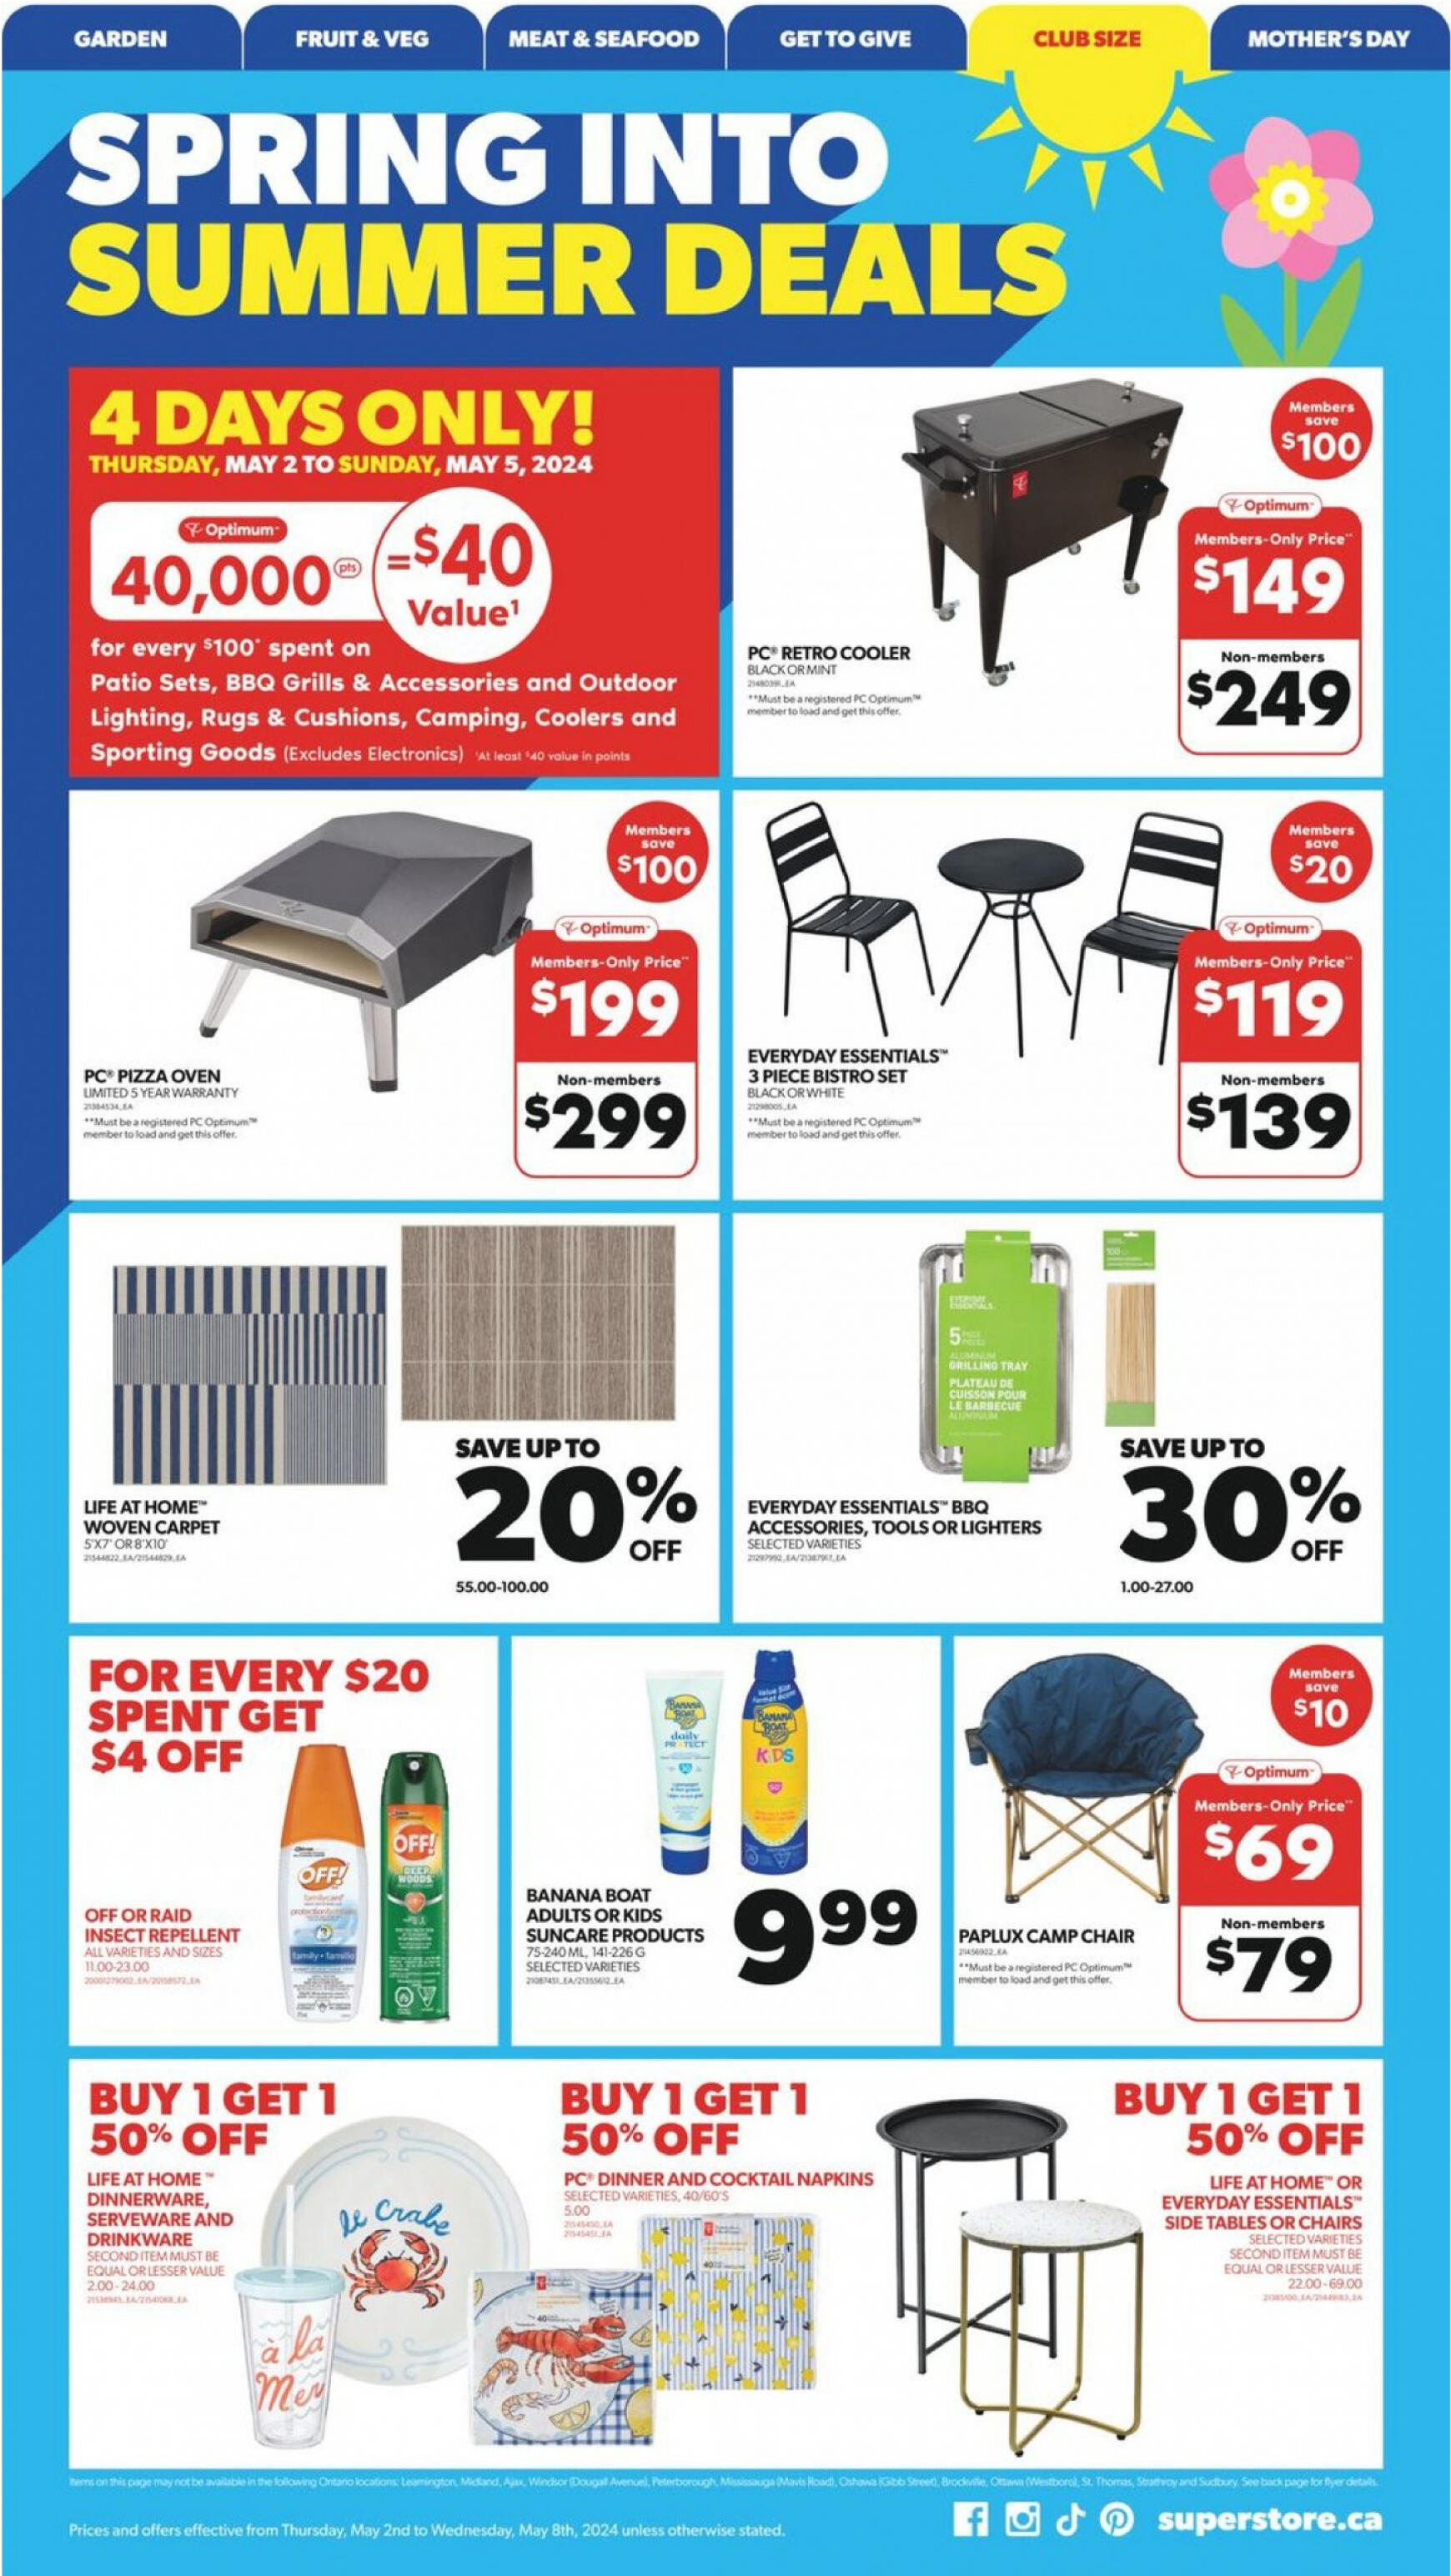 real-canadian-superstore - Real Canadian Superstore flyer current 02.05. - 08.05. - page: 28